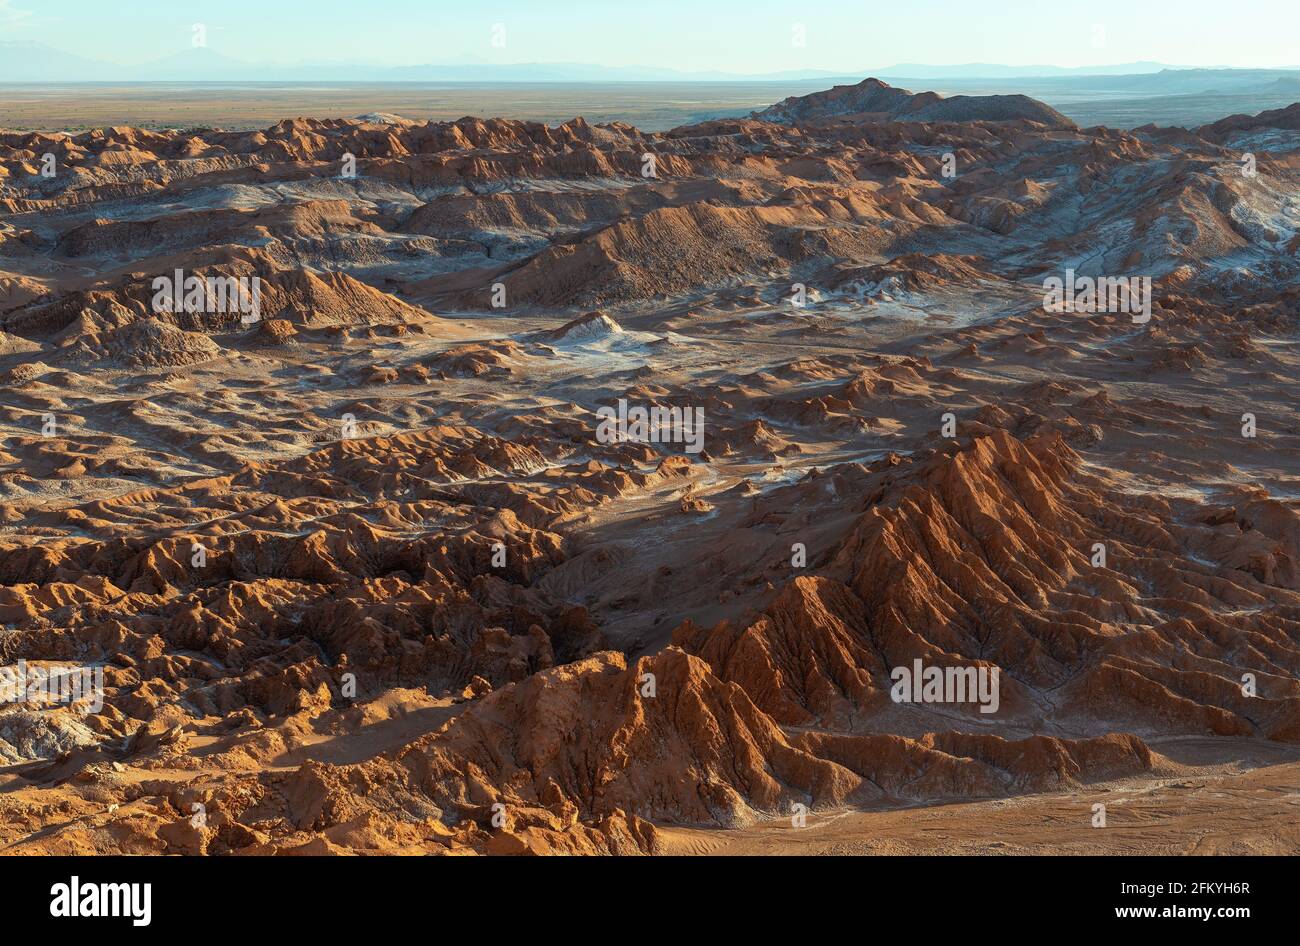 Sunset in the Death Valley (Valle de la Muerte) of the Atacama desert with its moon landscape and geologic rock formations, Chile. Stock Photo